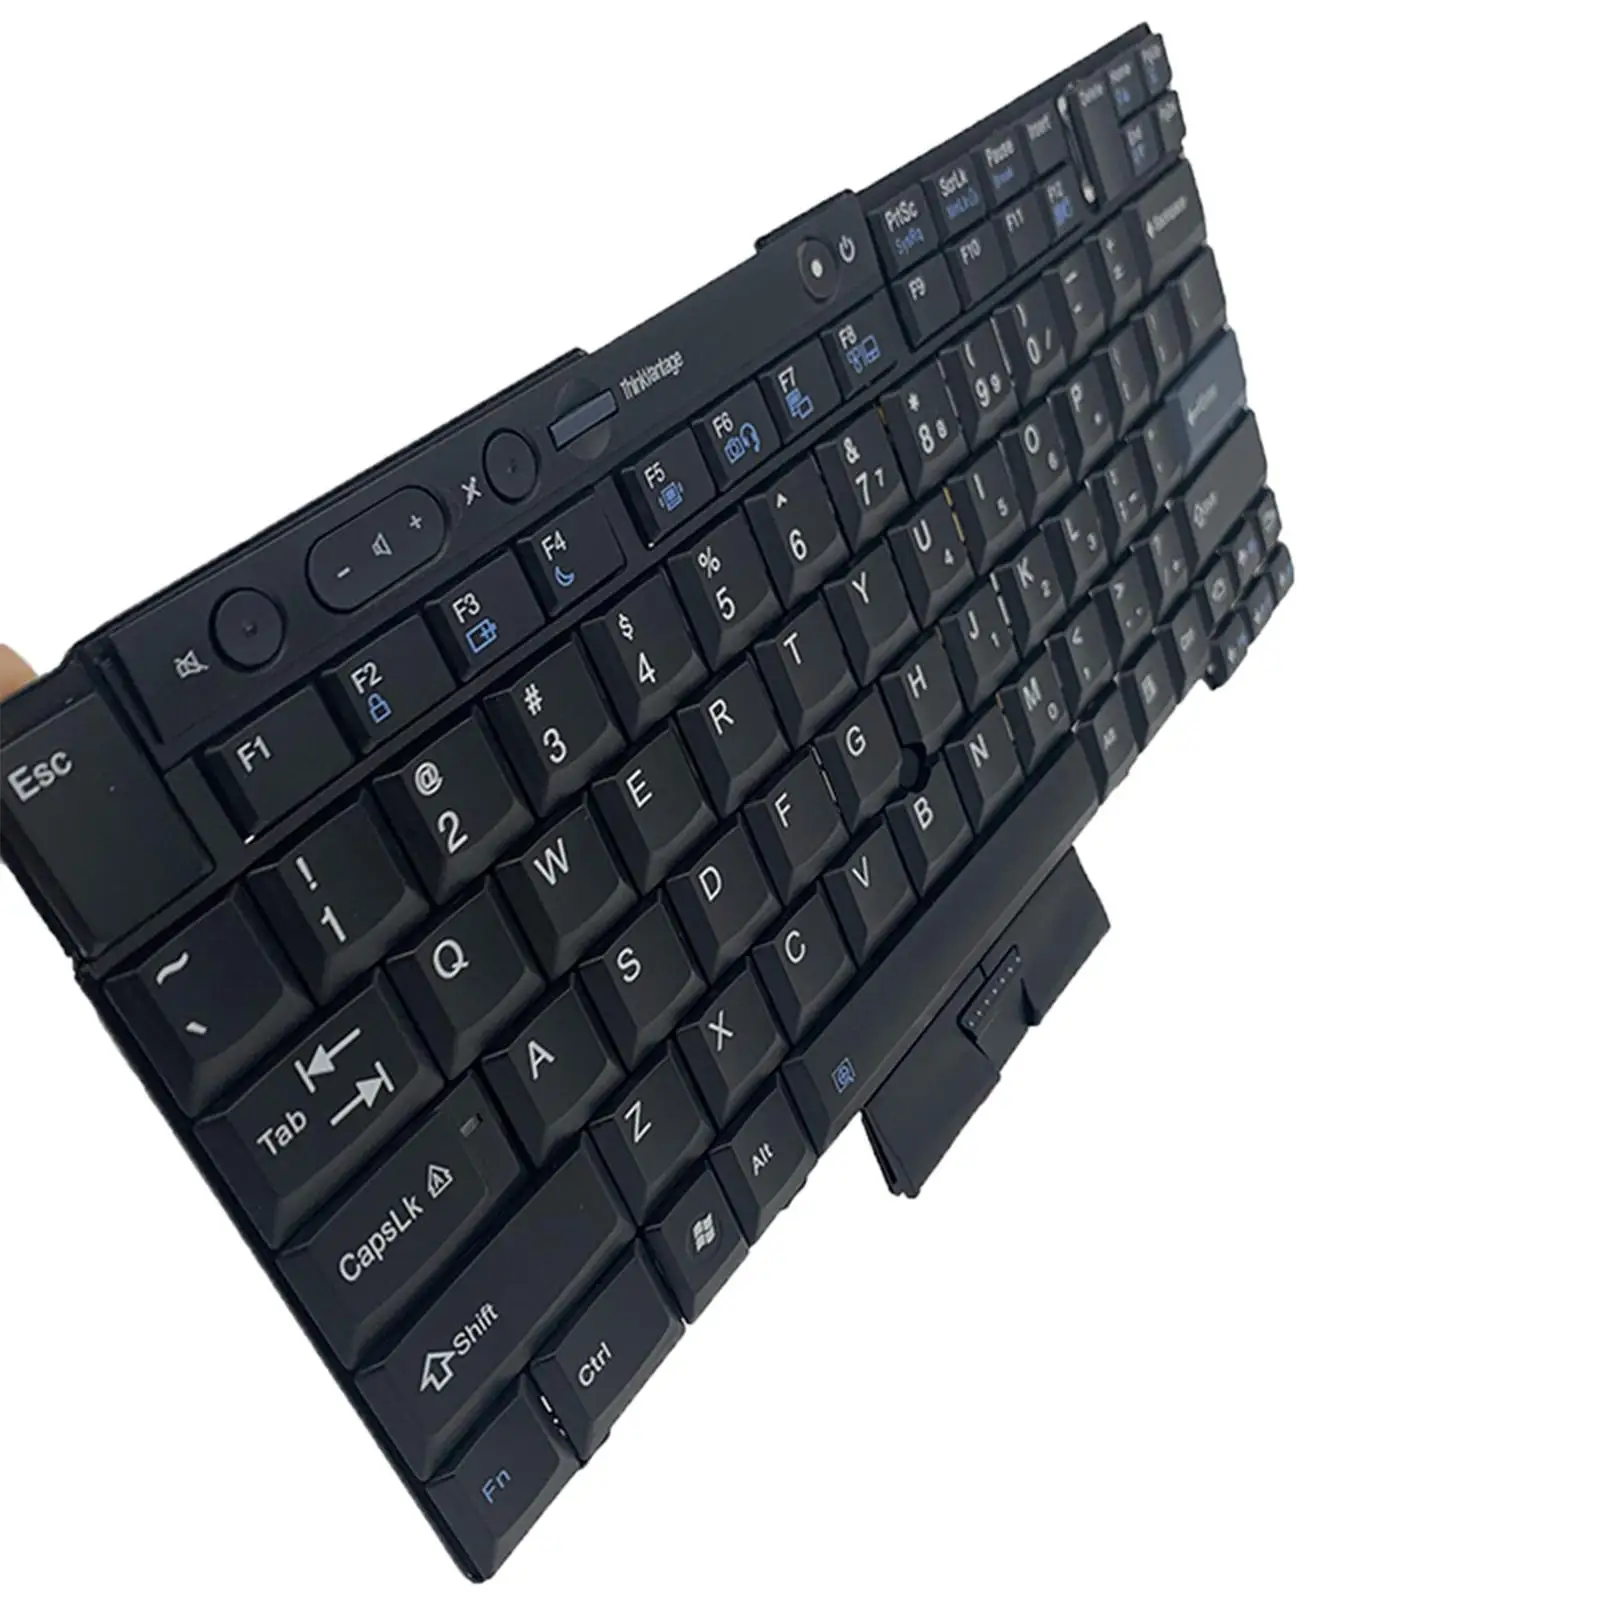 Laptop Replacement Keyboard for Lenovo ThinkPad T410 W510 W520 T410S T420 x220T x220S